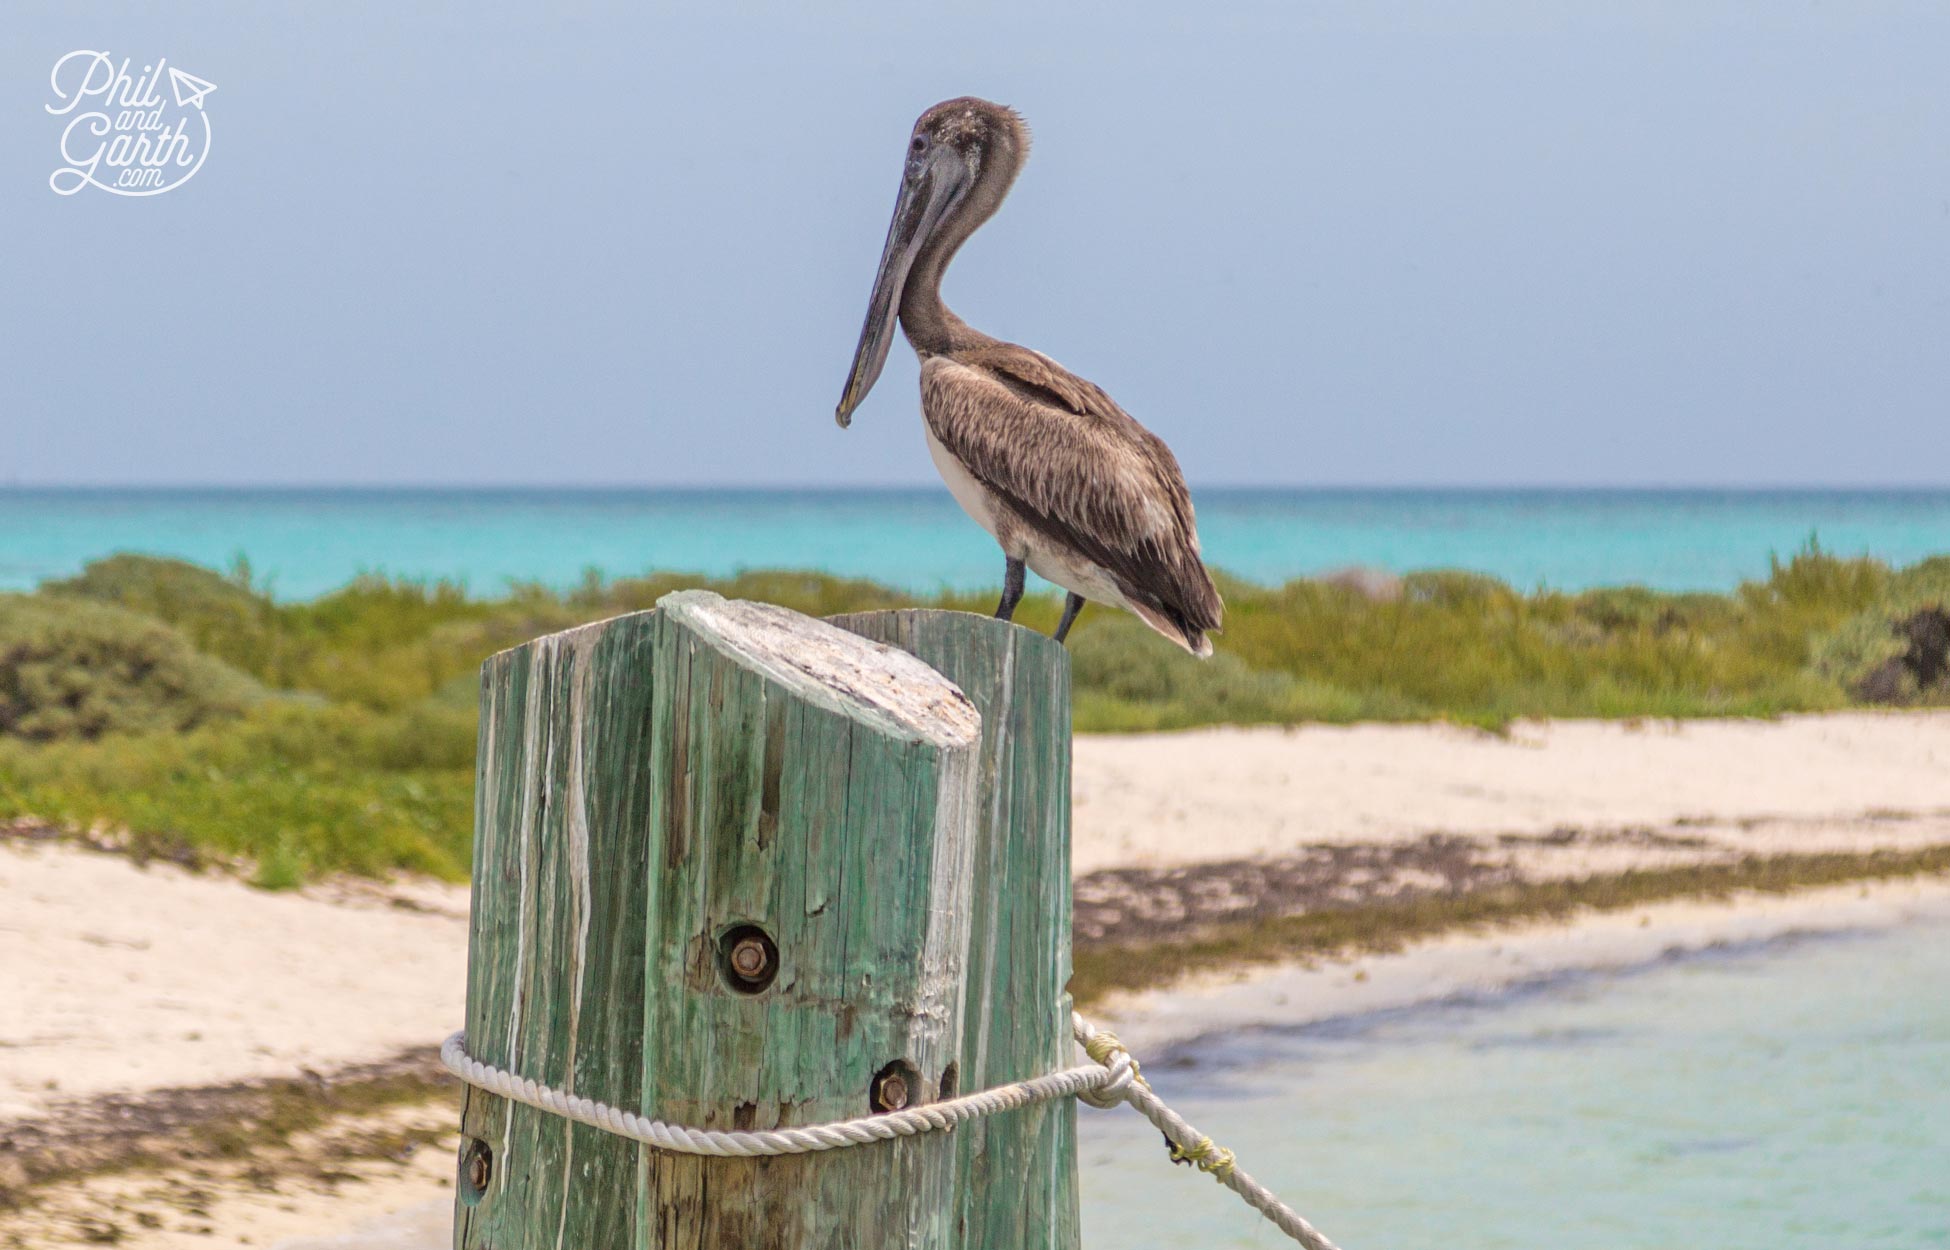 Plenty of bird watching opportunities at the Dry Tortugas National Park